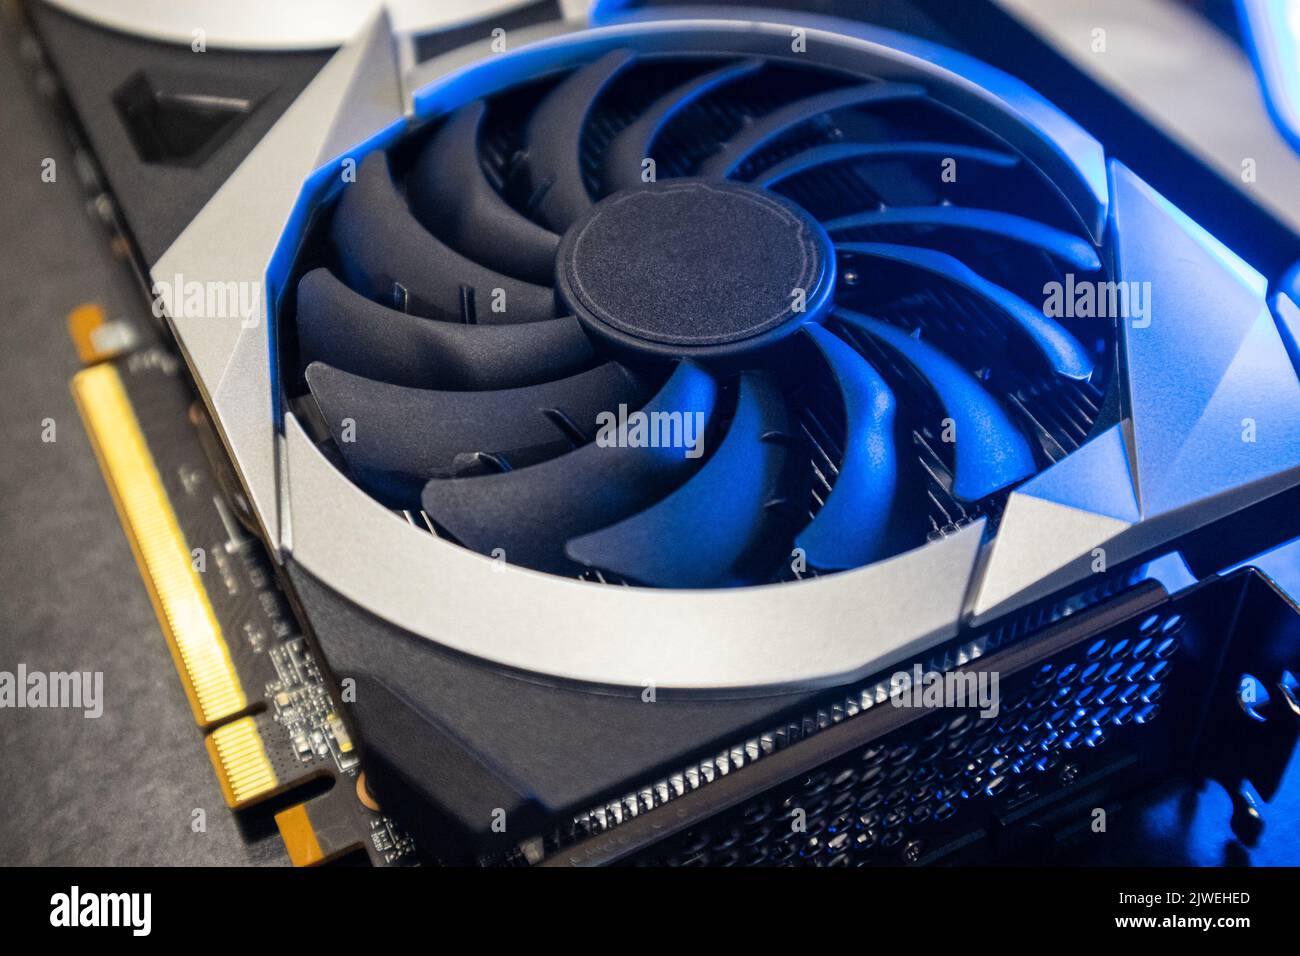 Gpu graphics card top view. Cooler fan close-up in bright blue light, PC hardware details. Components from computer cooling system with selective focu Stock Photo